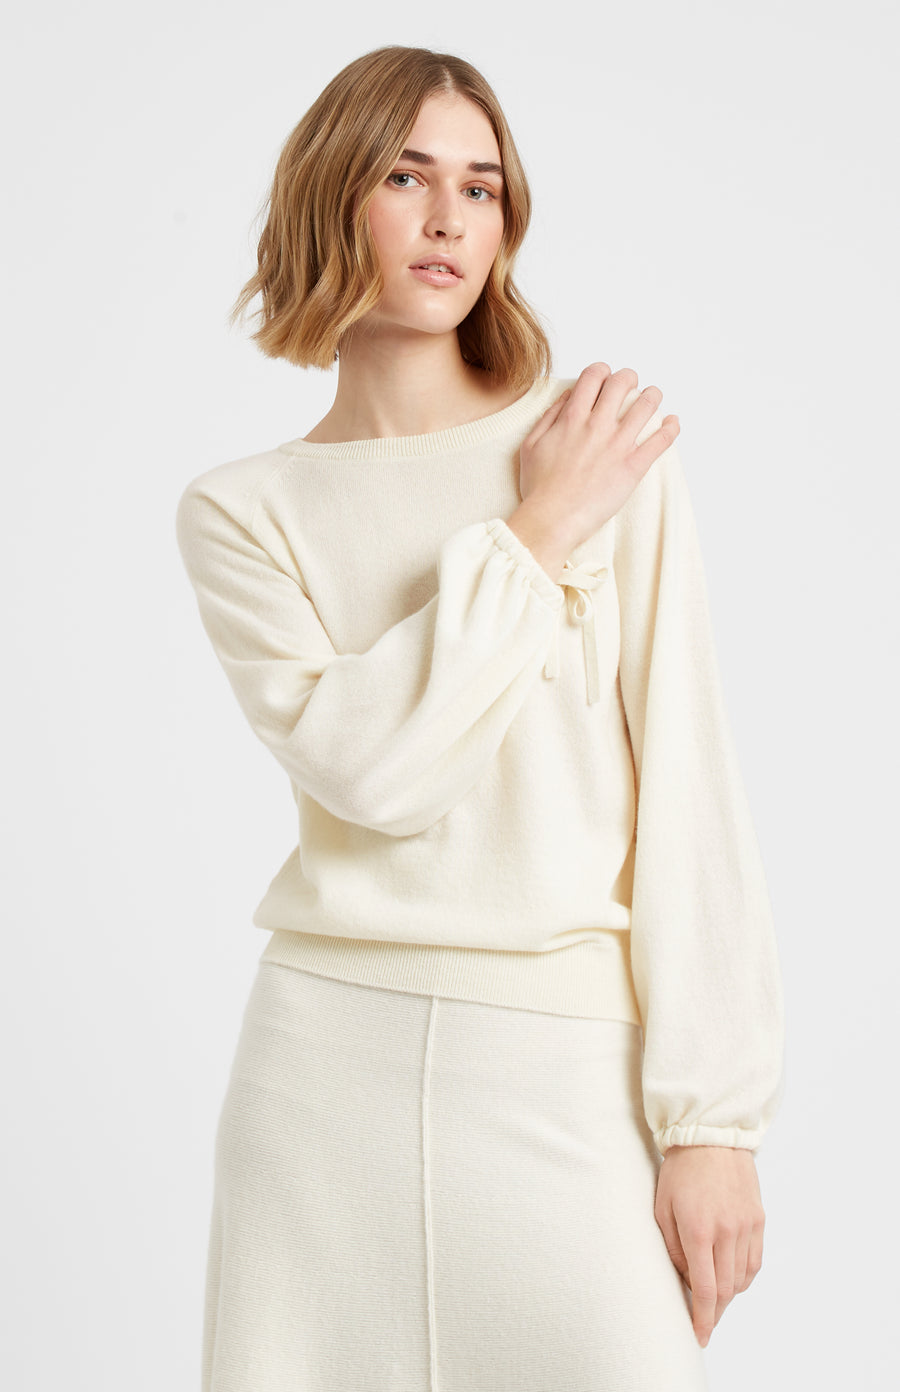 Pringle of Scotland Lightweight Round Neck Cashmere Jumper in Off White on model